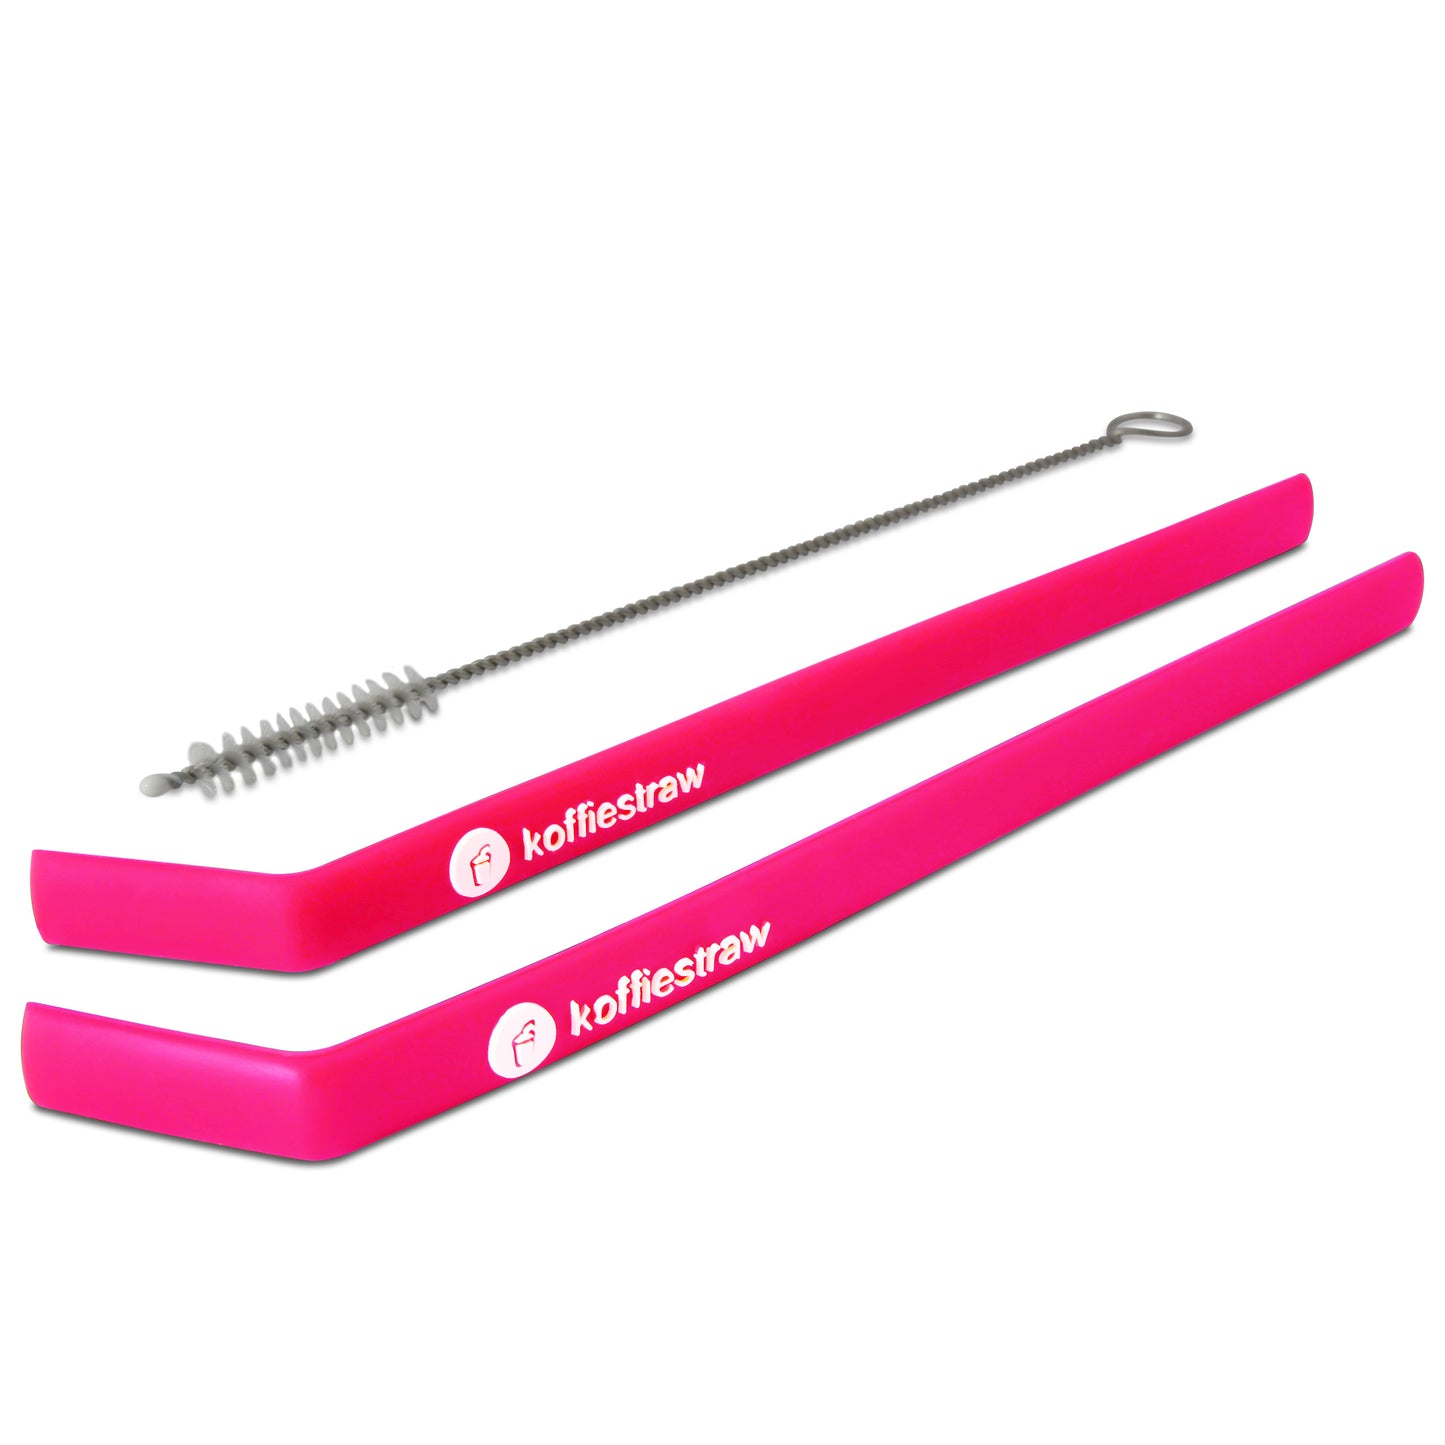 GIFT TUBE of Hot Pink KoffieStraws: 2x of 8" KoffieStraws and 1x stainless steel cleaning brush